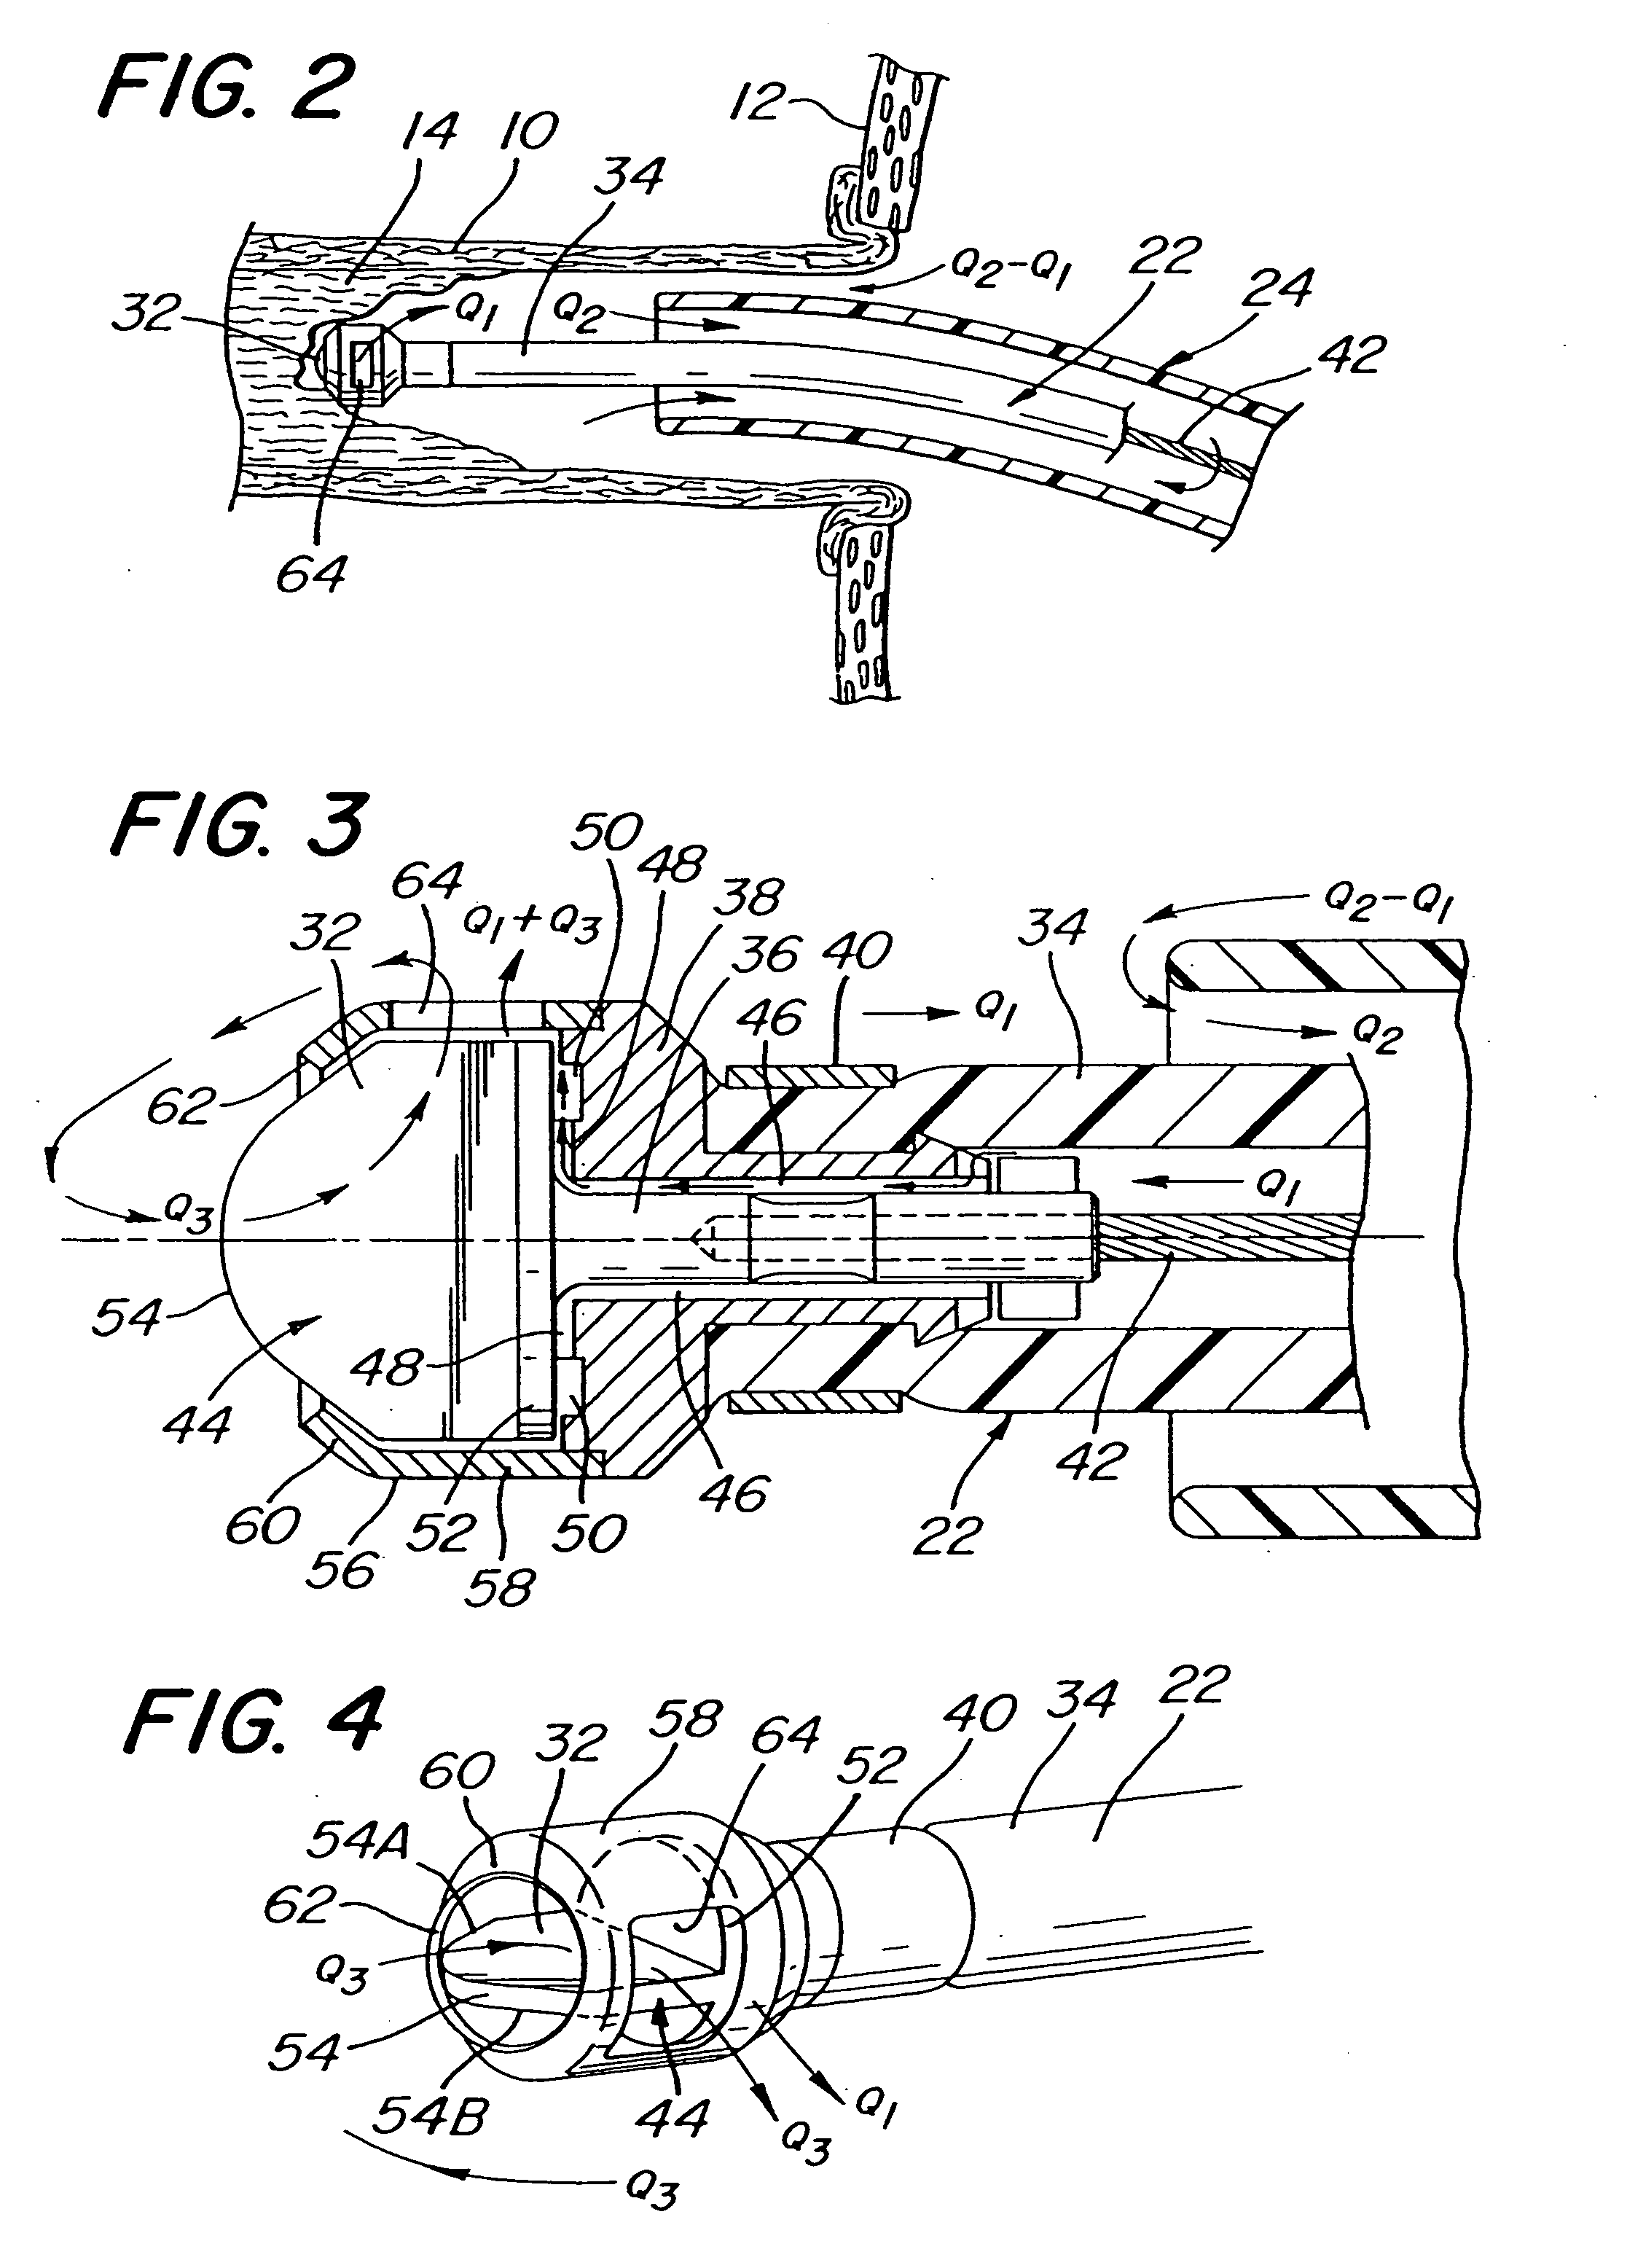 Method for opening a lumen in an occluded blood vessel